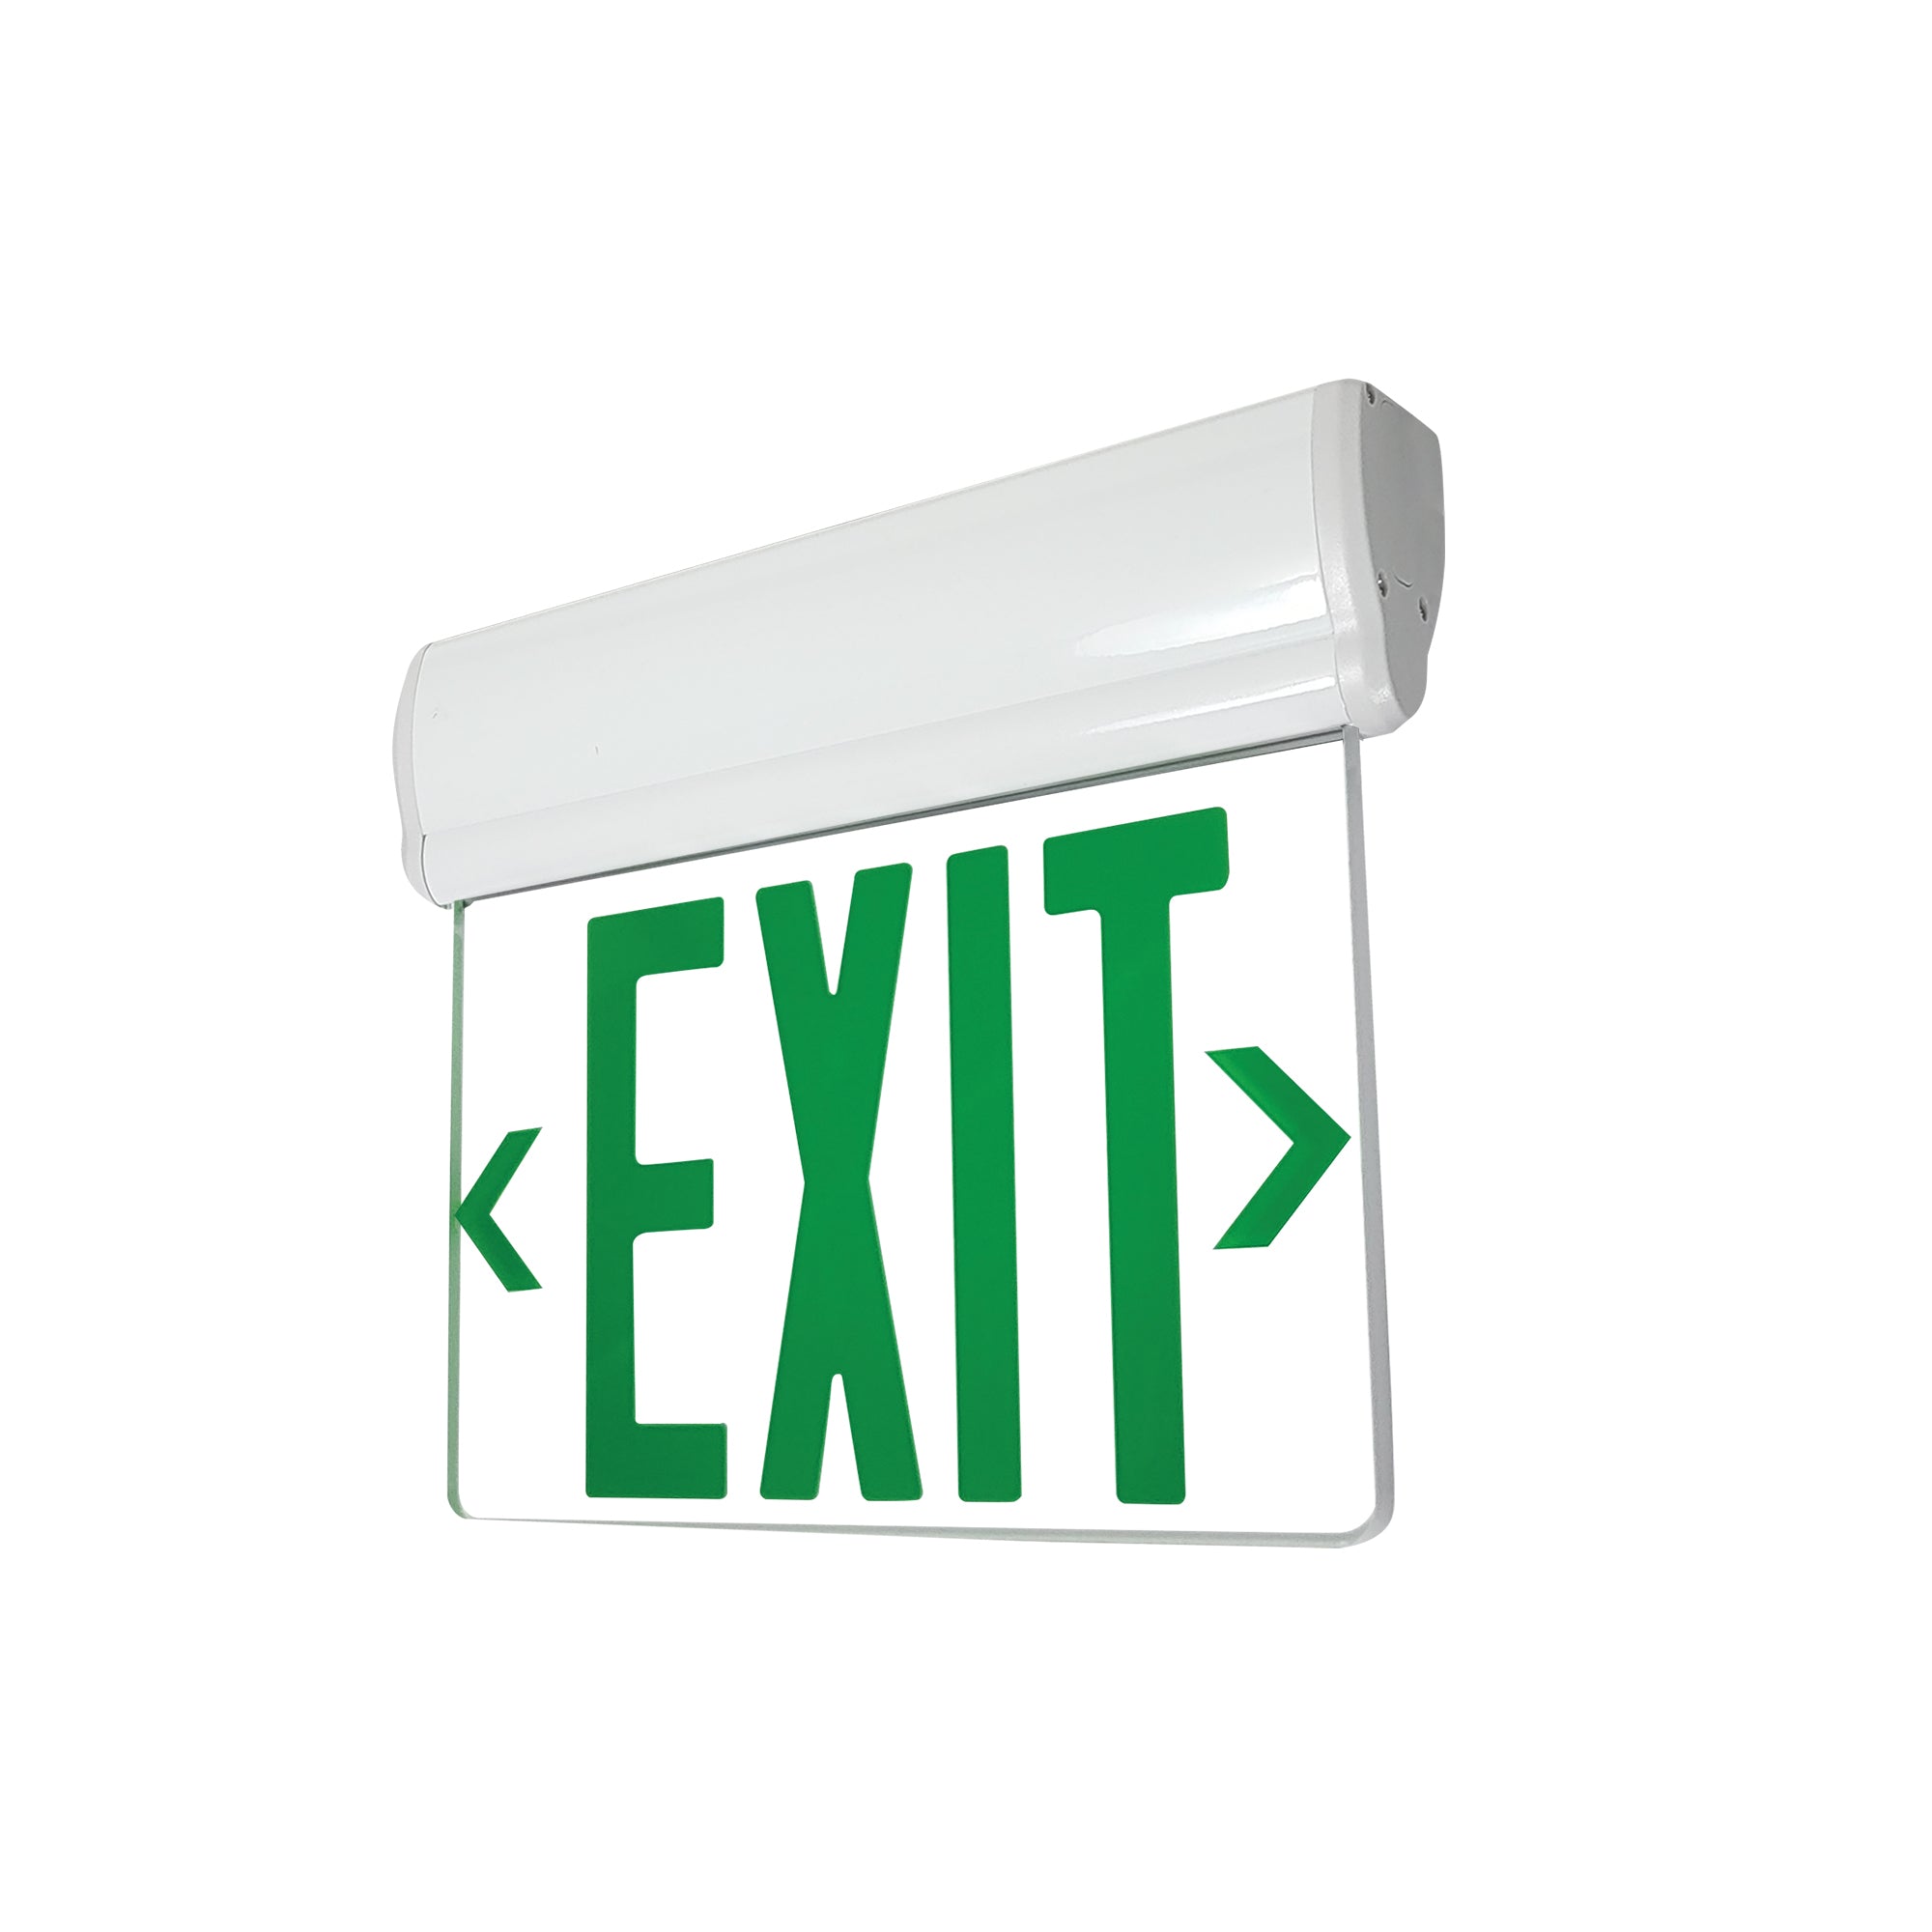 Nora Lighting NX-810-LEDGCW - Exit / Emergency - Surface Adjustable LED Edge-Lit Exit Sign, AC only, 6 Inch Green Letters, Single Face / Clear Acrylic, White Housing